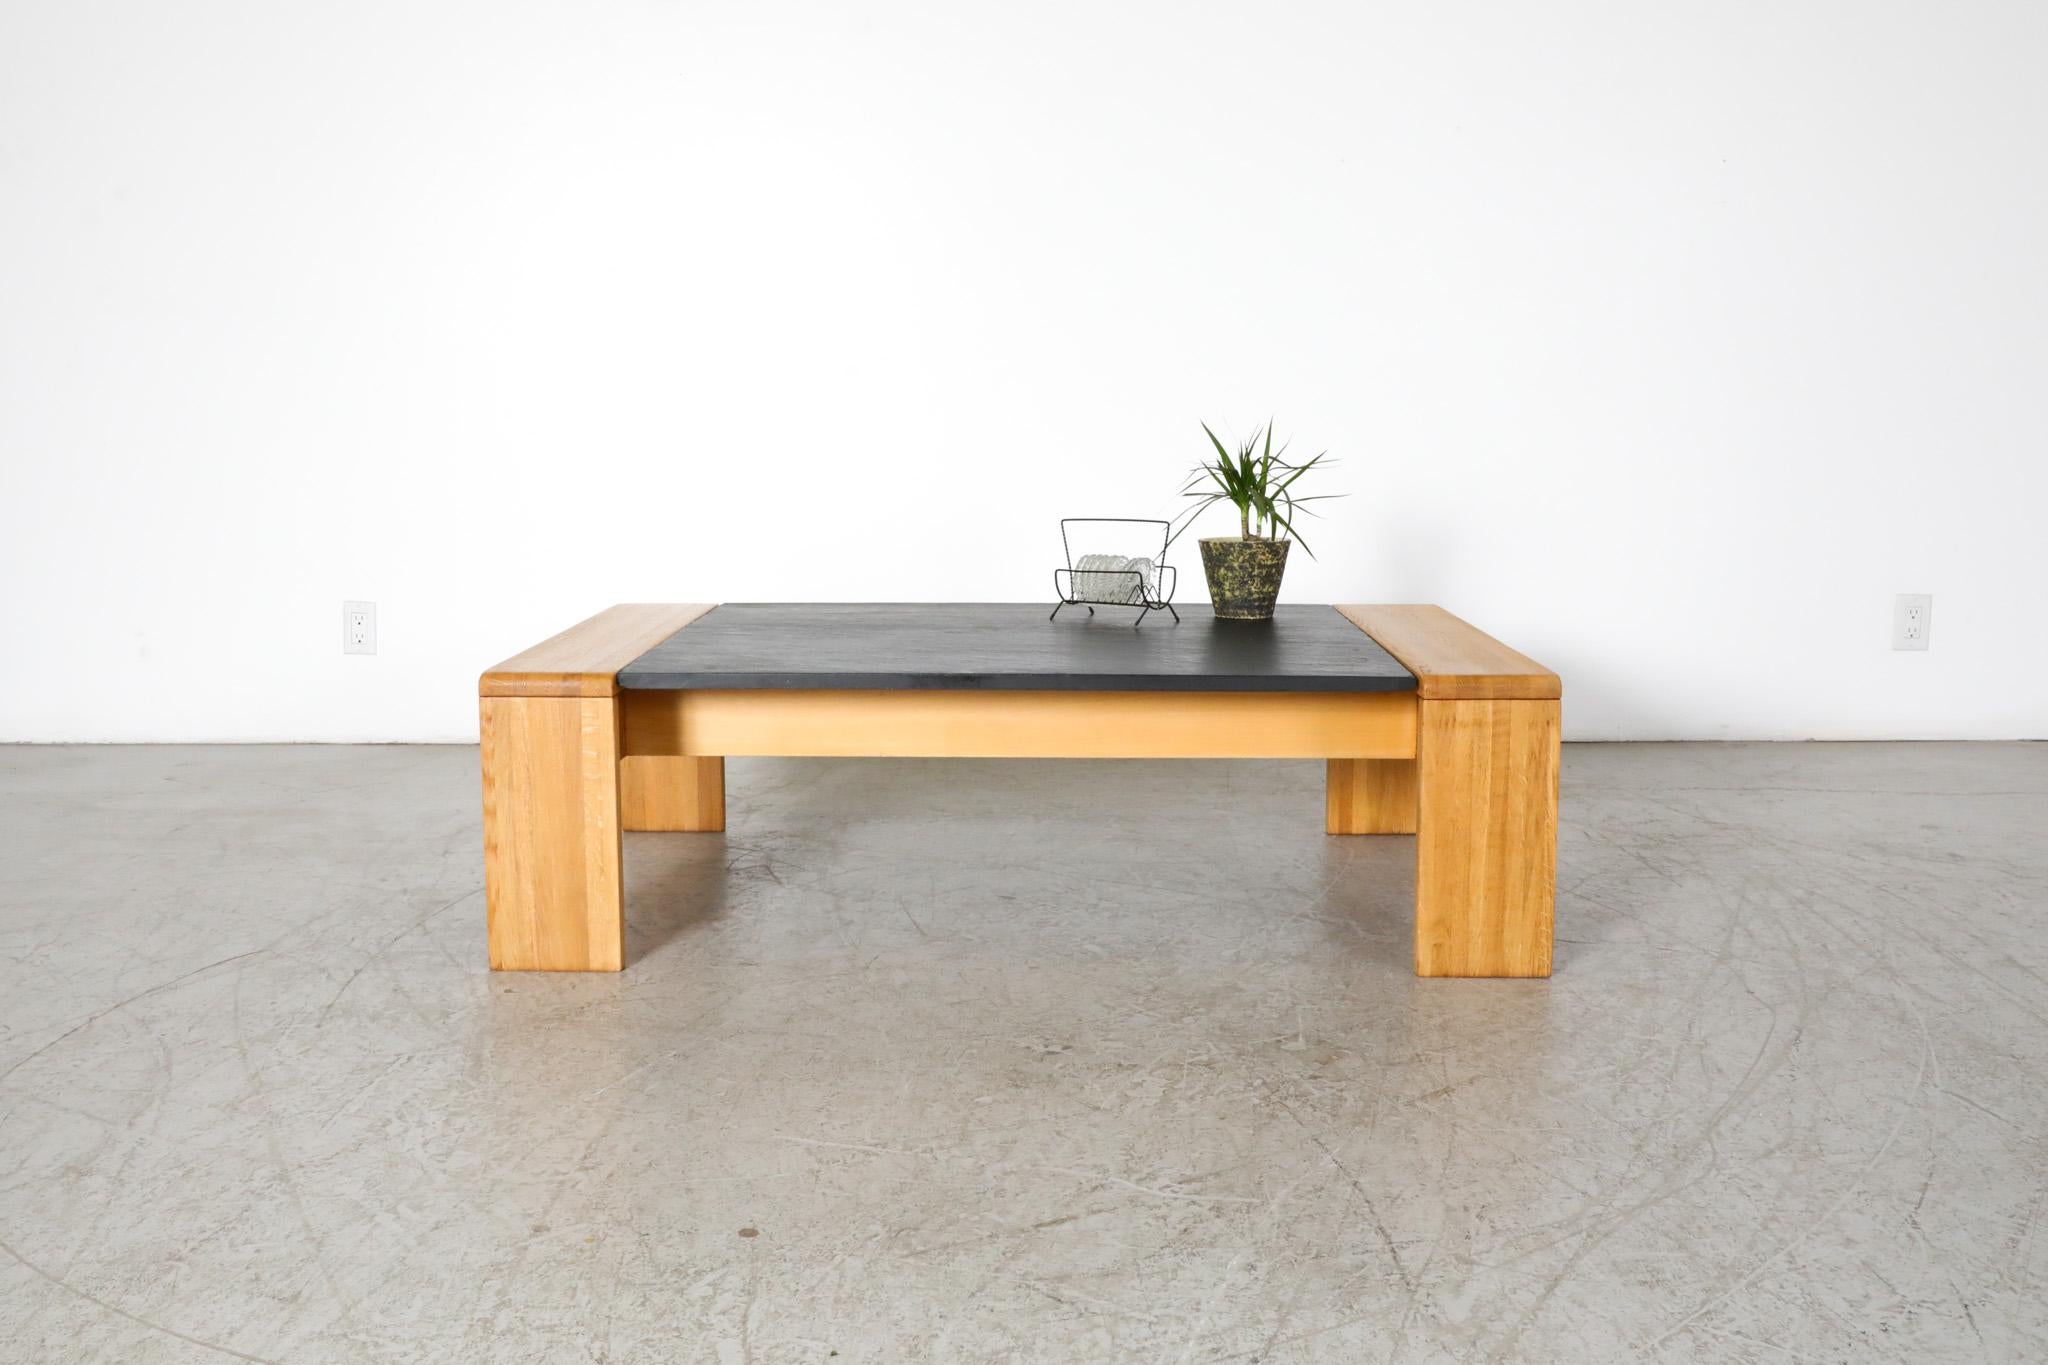 Mid-Century, Leolux made, stone top coffee table. Similar in appeal to the work of Tobia Scarpa. Beautiful carved oak wood frame with inset slate stone make this a gorgeous pairing of organic materials with clean, austere esthetics. Perfect for an